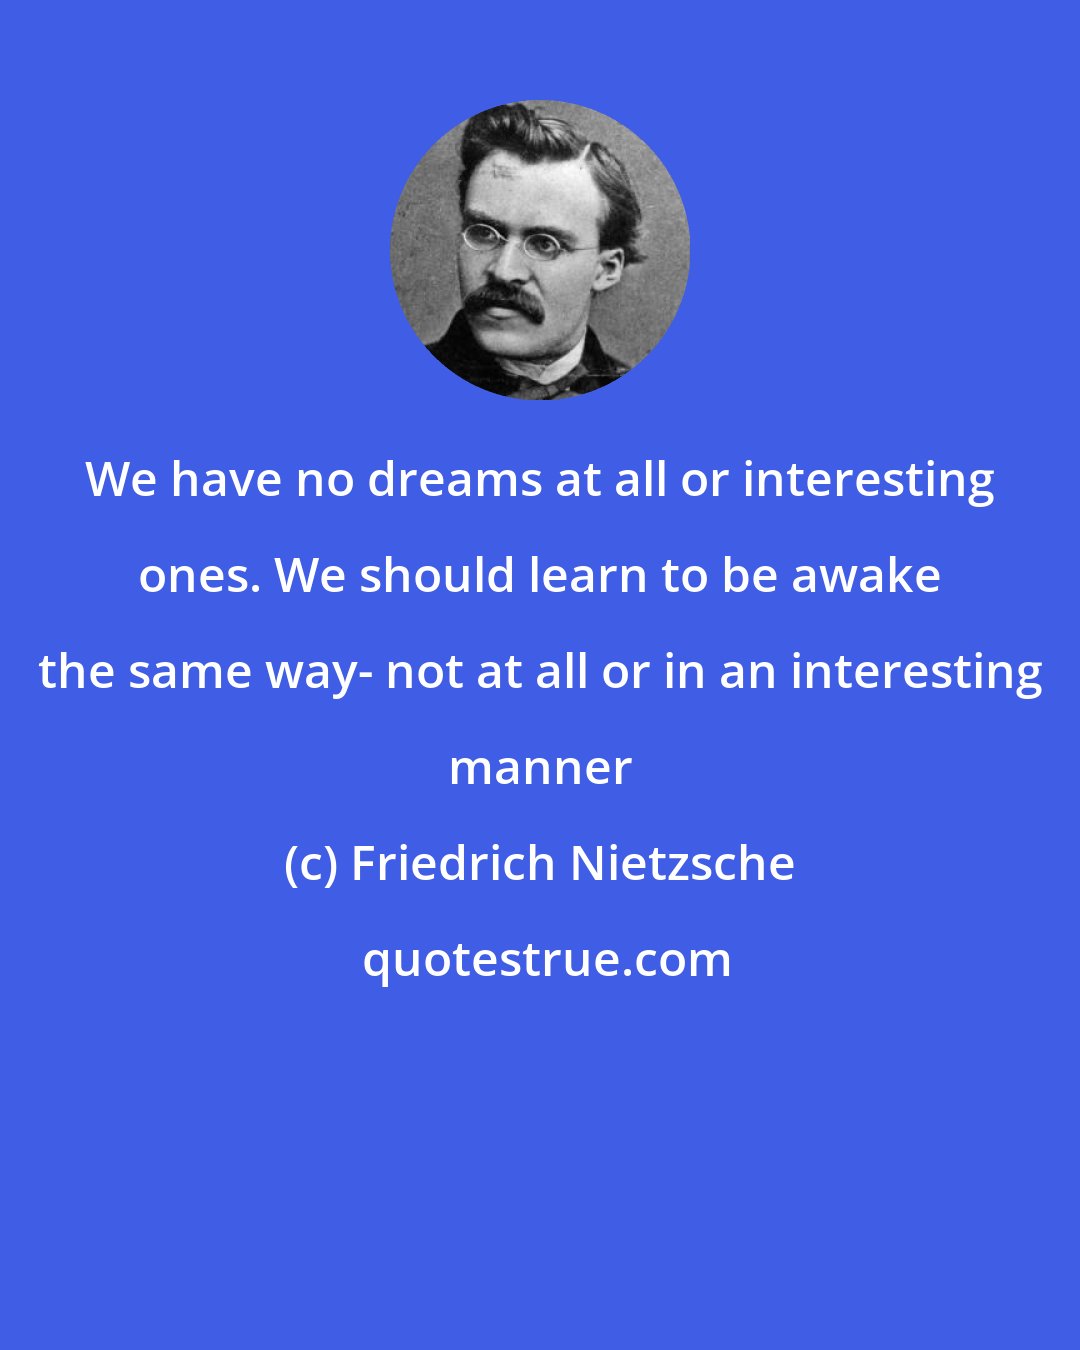 Friedrich Nietzsche: We have no dreams at all or interesting ones. We should learn to be awake the same way- not at all or in an interesting manner